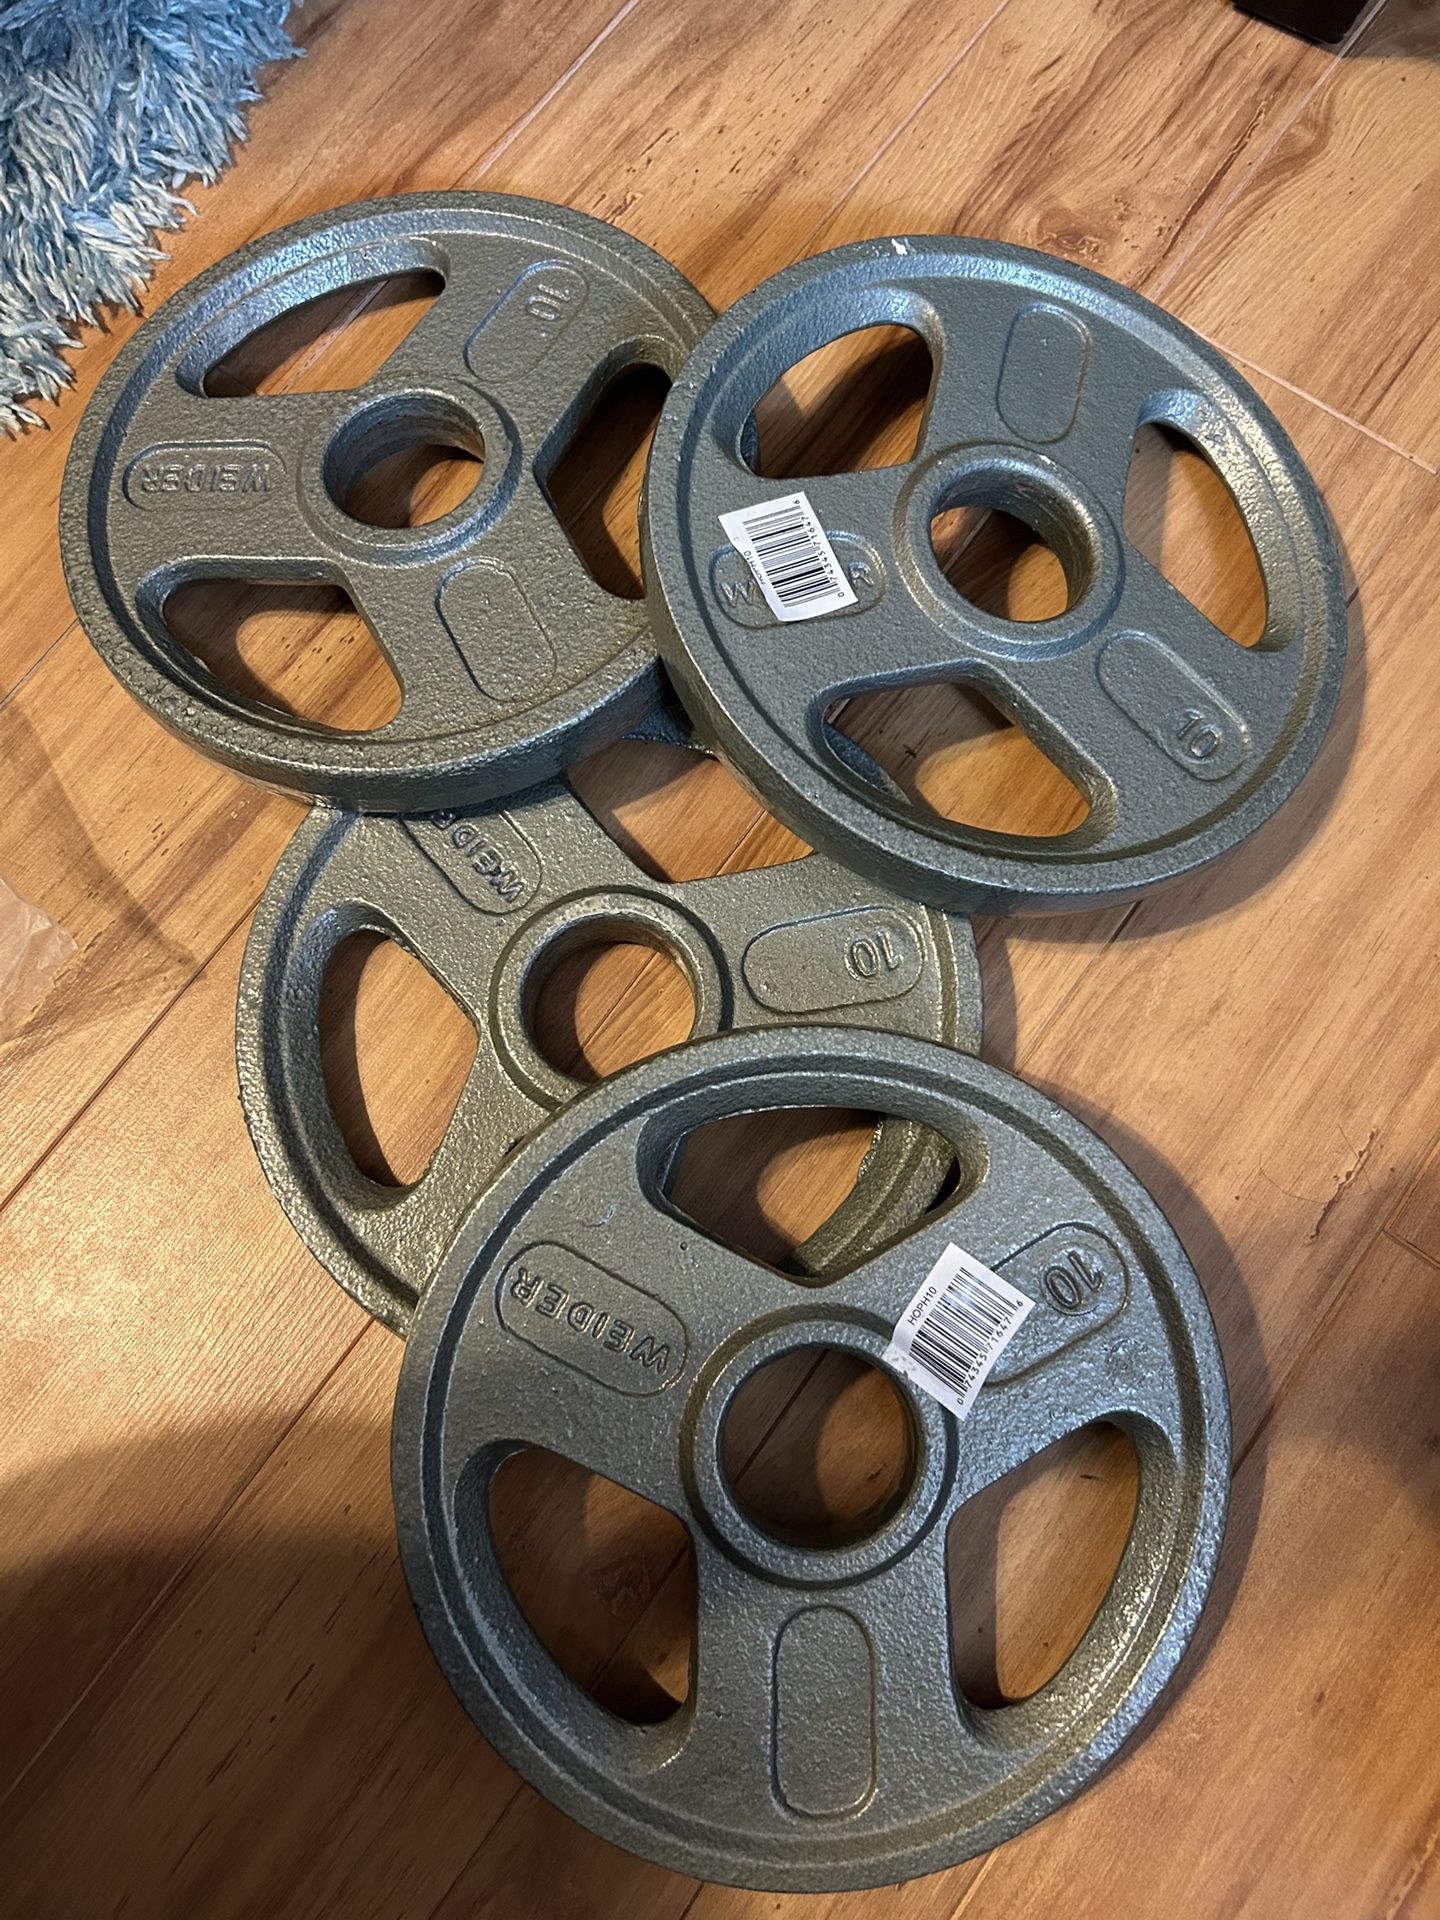 LOT 4 40 lbs Weider 10 lb. Olympic Weights Plates Hammertone Finish